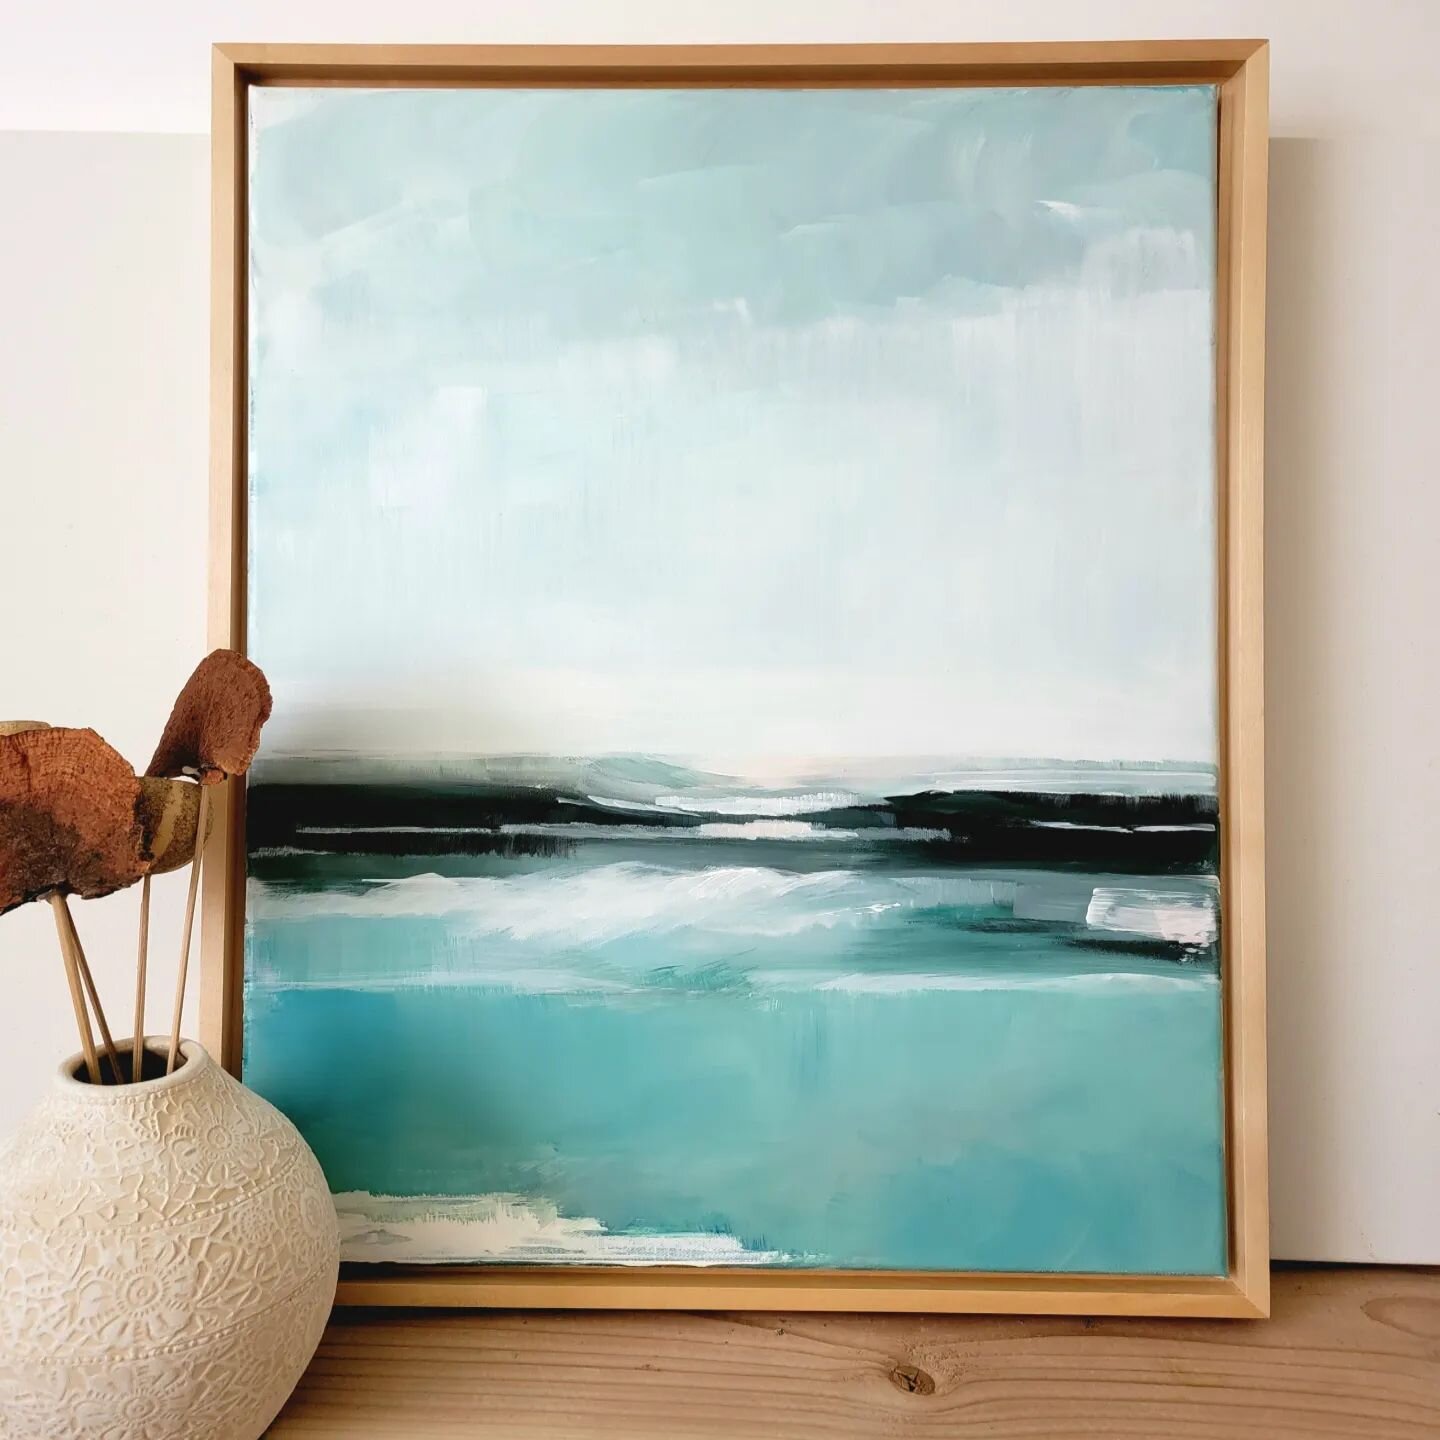 Adrift. Perfect painting for your summer home! DM if interested.  18x24. As always, if you need a larger size, just ask. 

#summervibes #summertime #summerday #oceanvibes🌊 #vacationmode #vacationhomerental #vacationonthelake #mykindofplace #calmingw